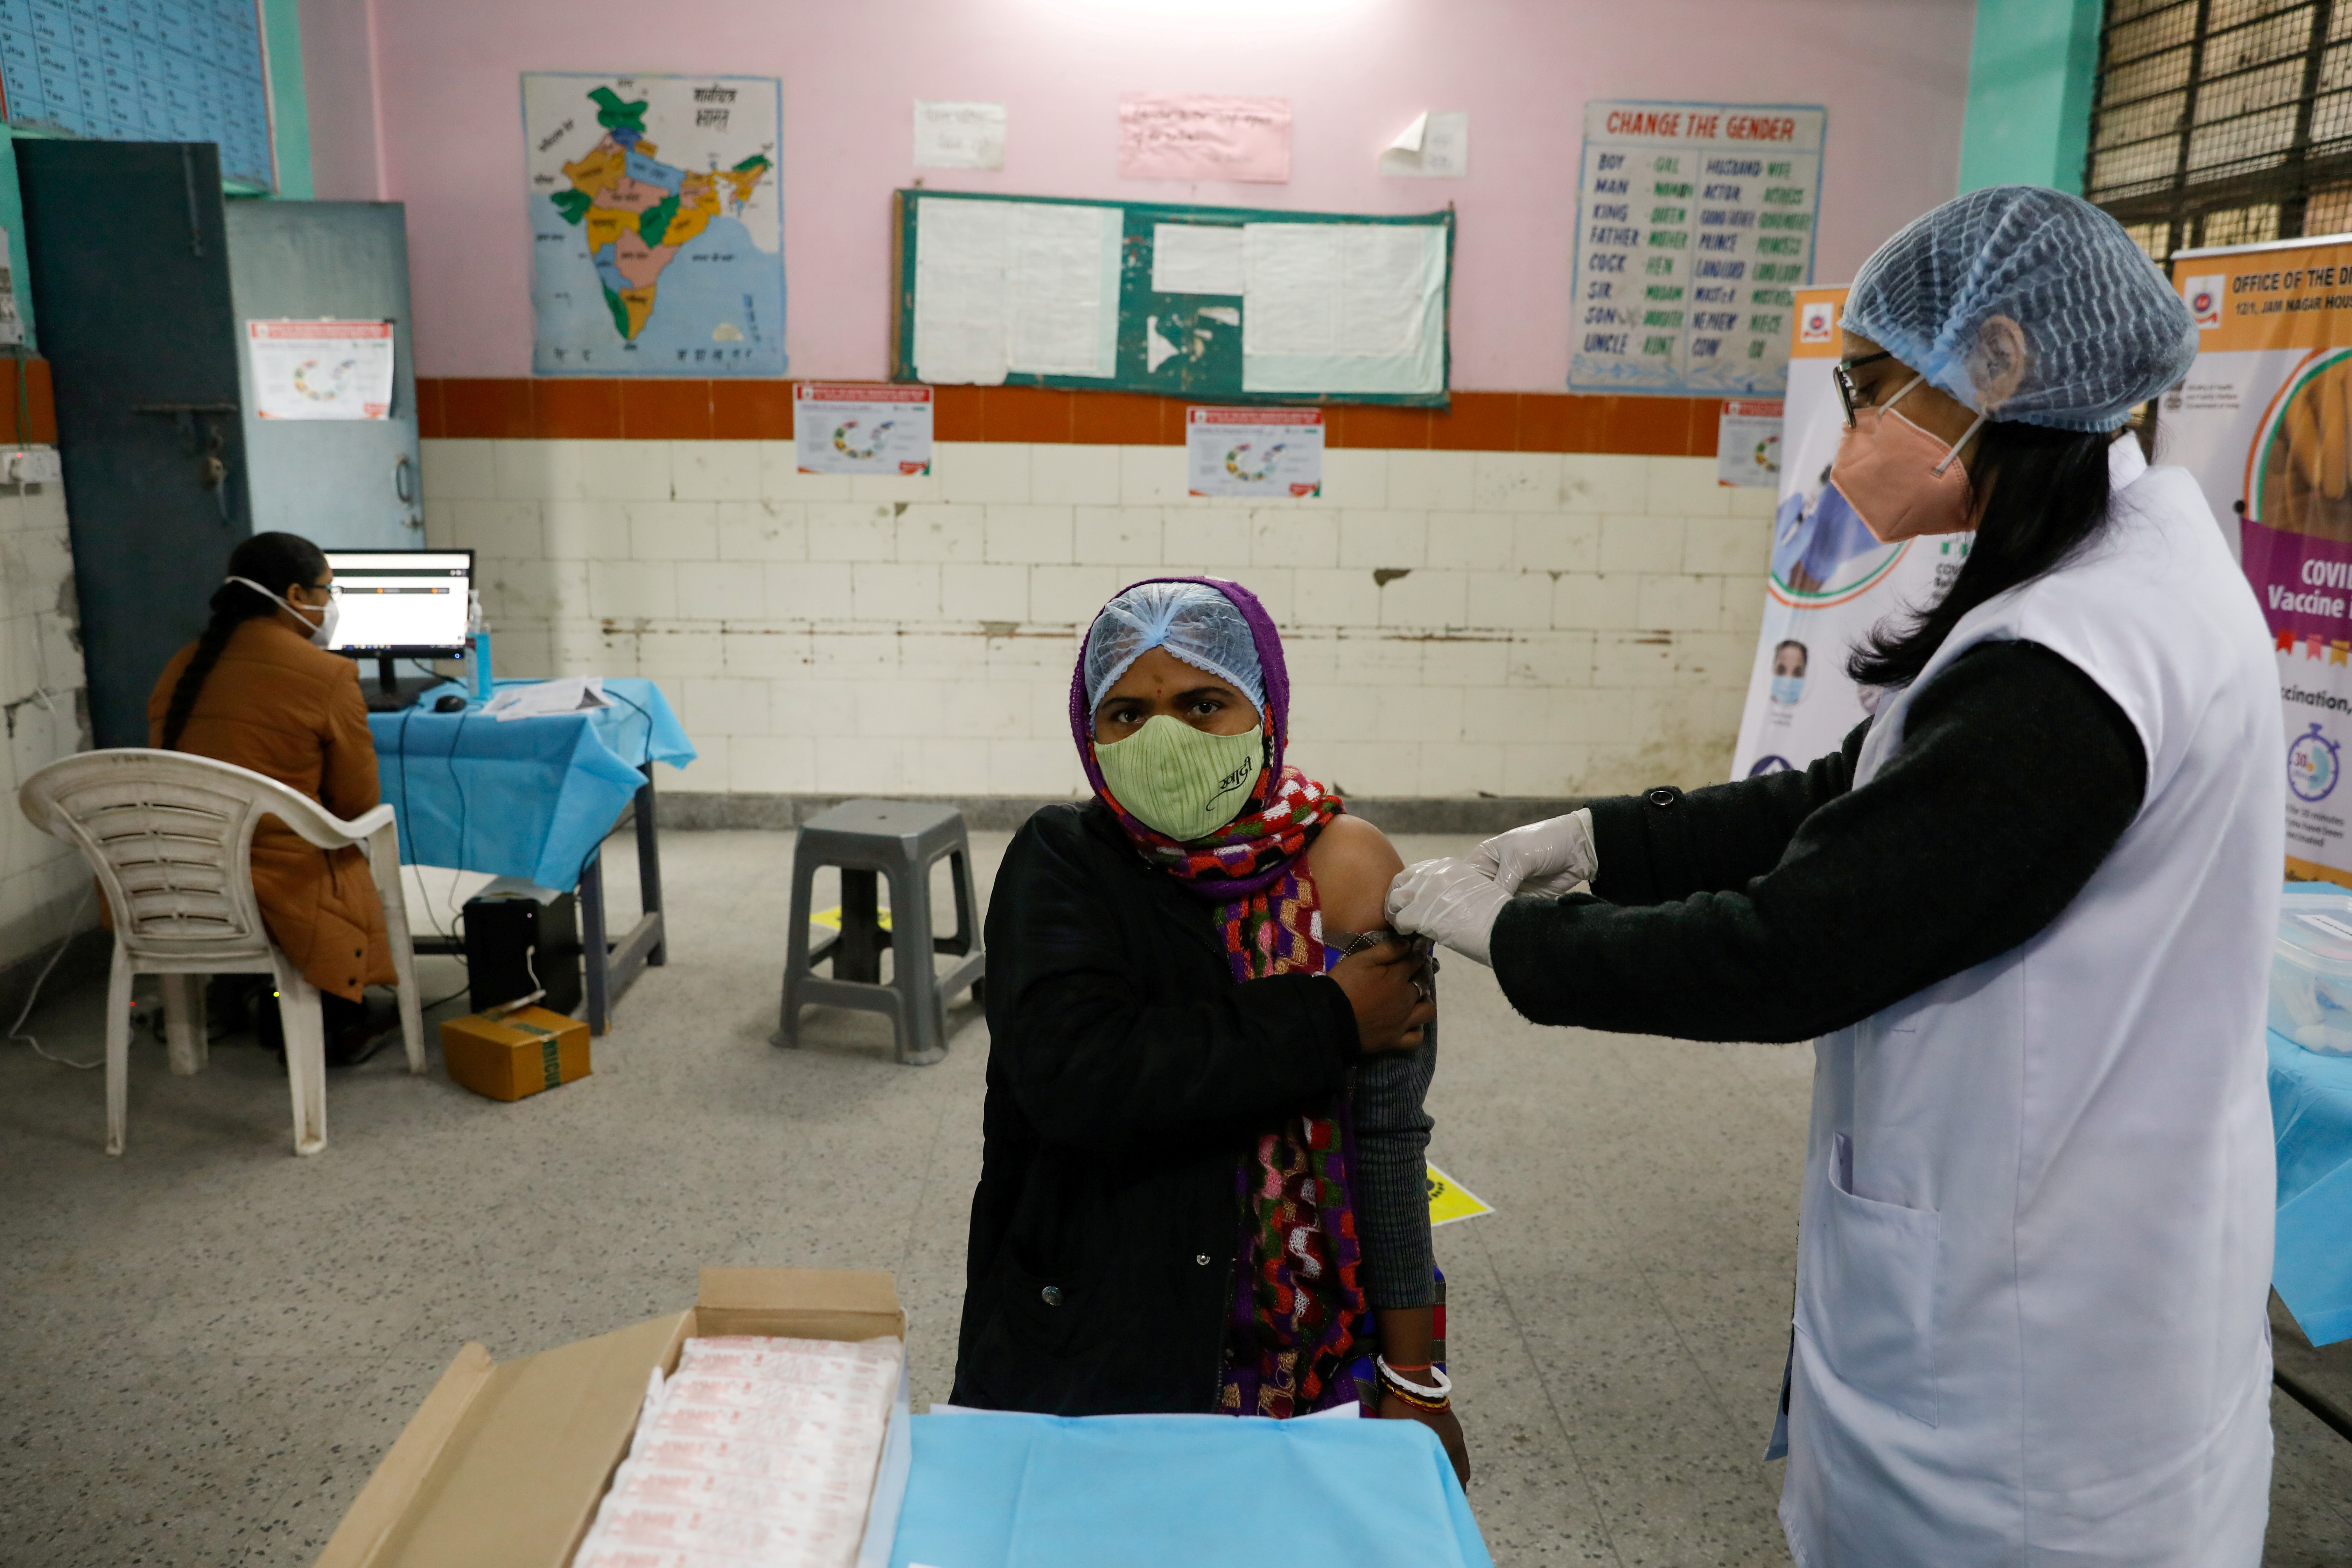 A health worker and a volunteer take part in a nationwide trial run of coronavirus disease (COVID-19) vaccine delivery systems, inside a school, which has been converted into a temporary vaccination centre, in New Delhi